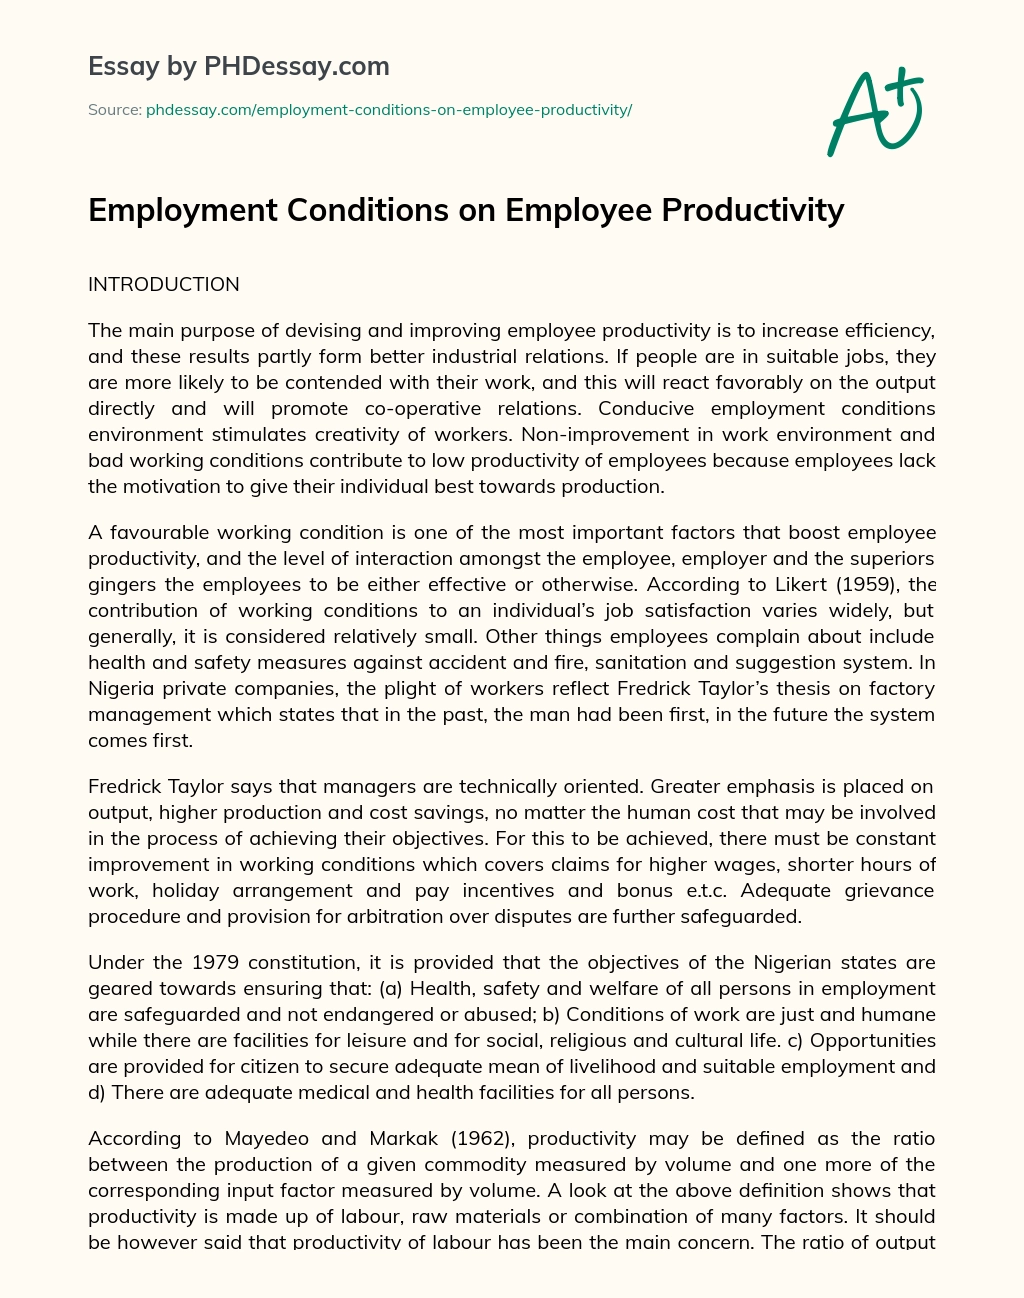 Employment Conditions on Employee Productivity essay